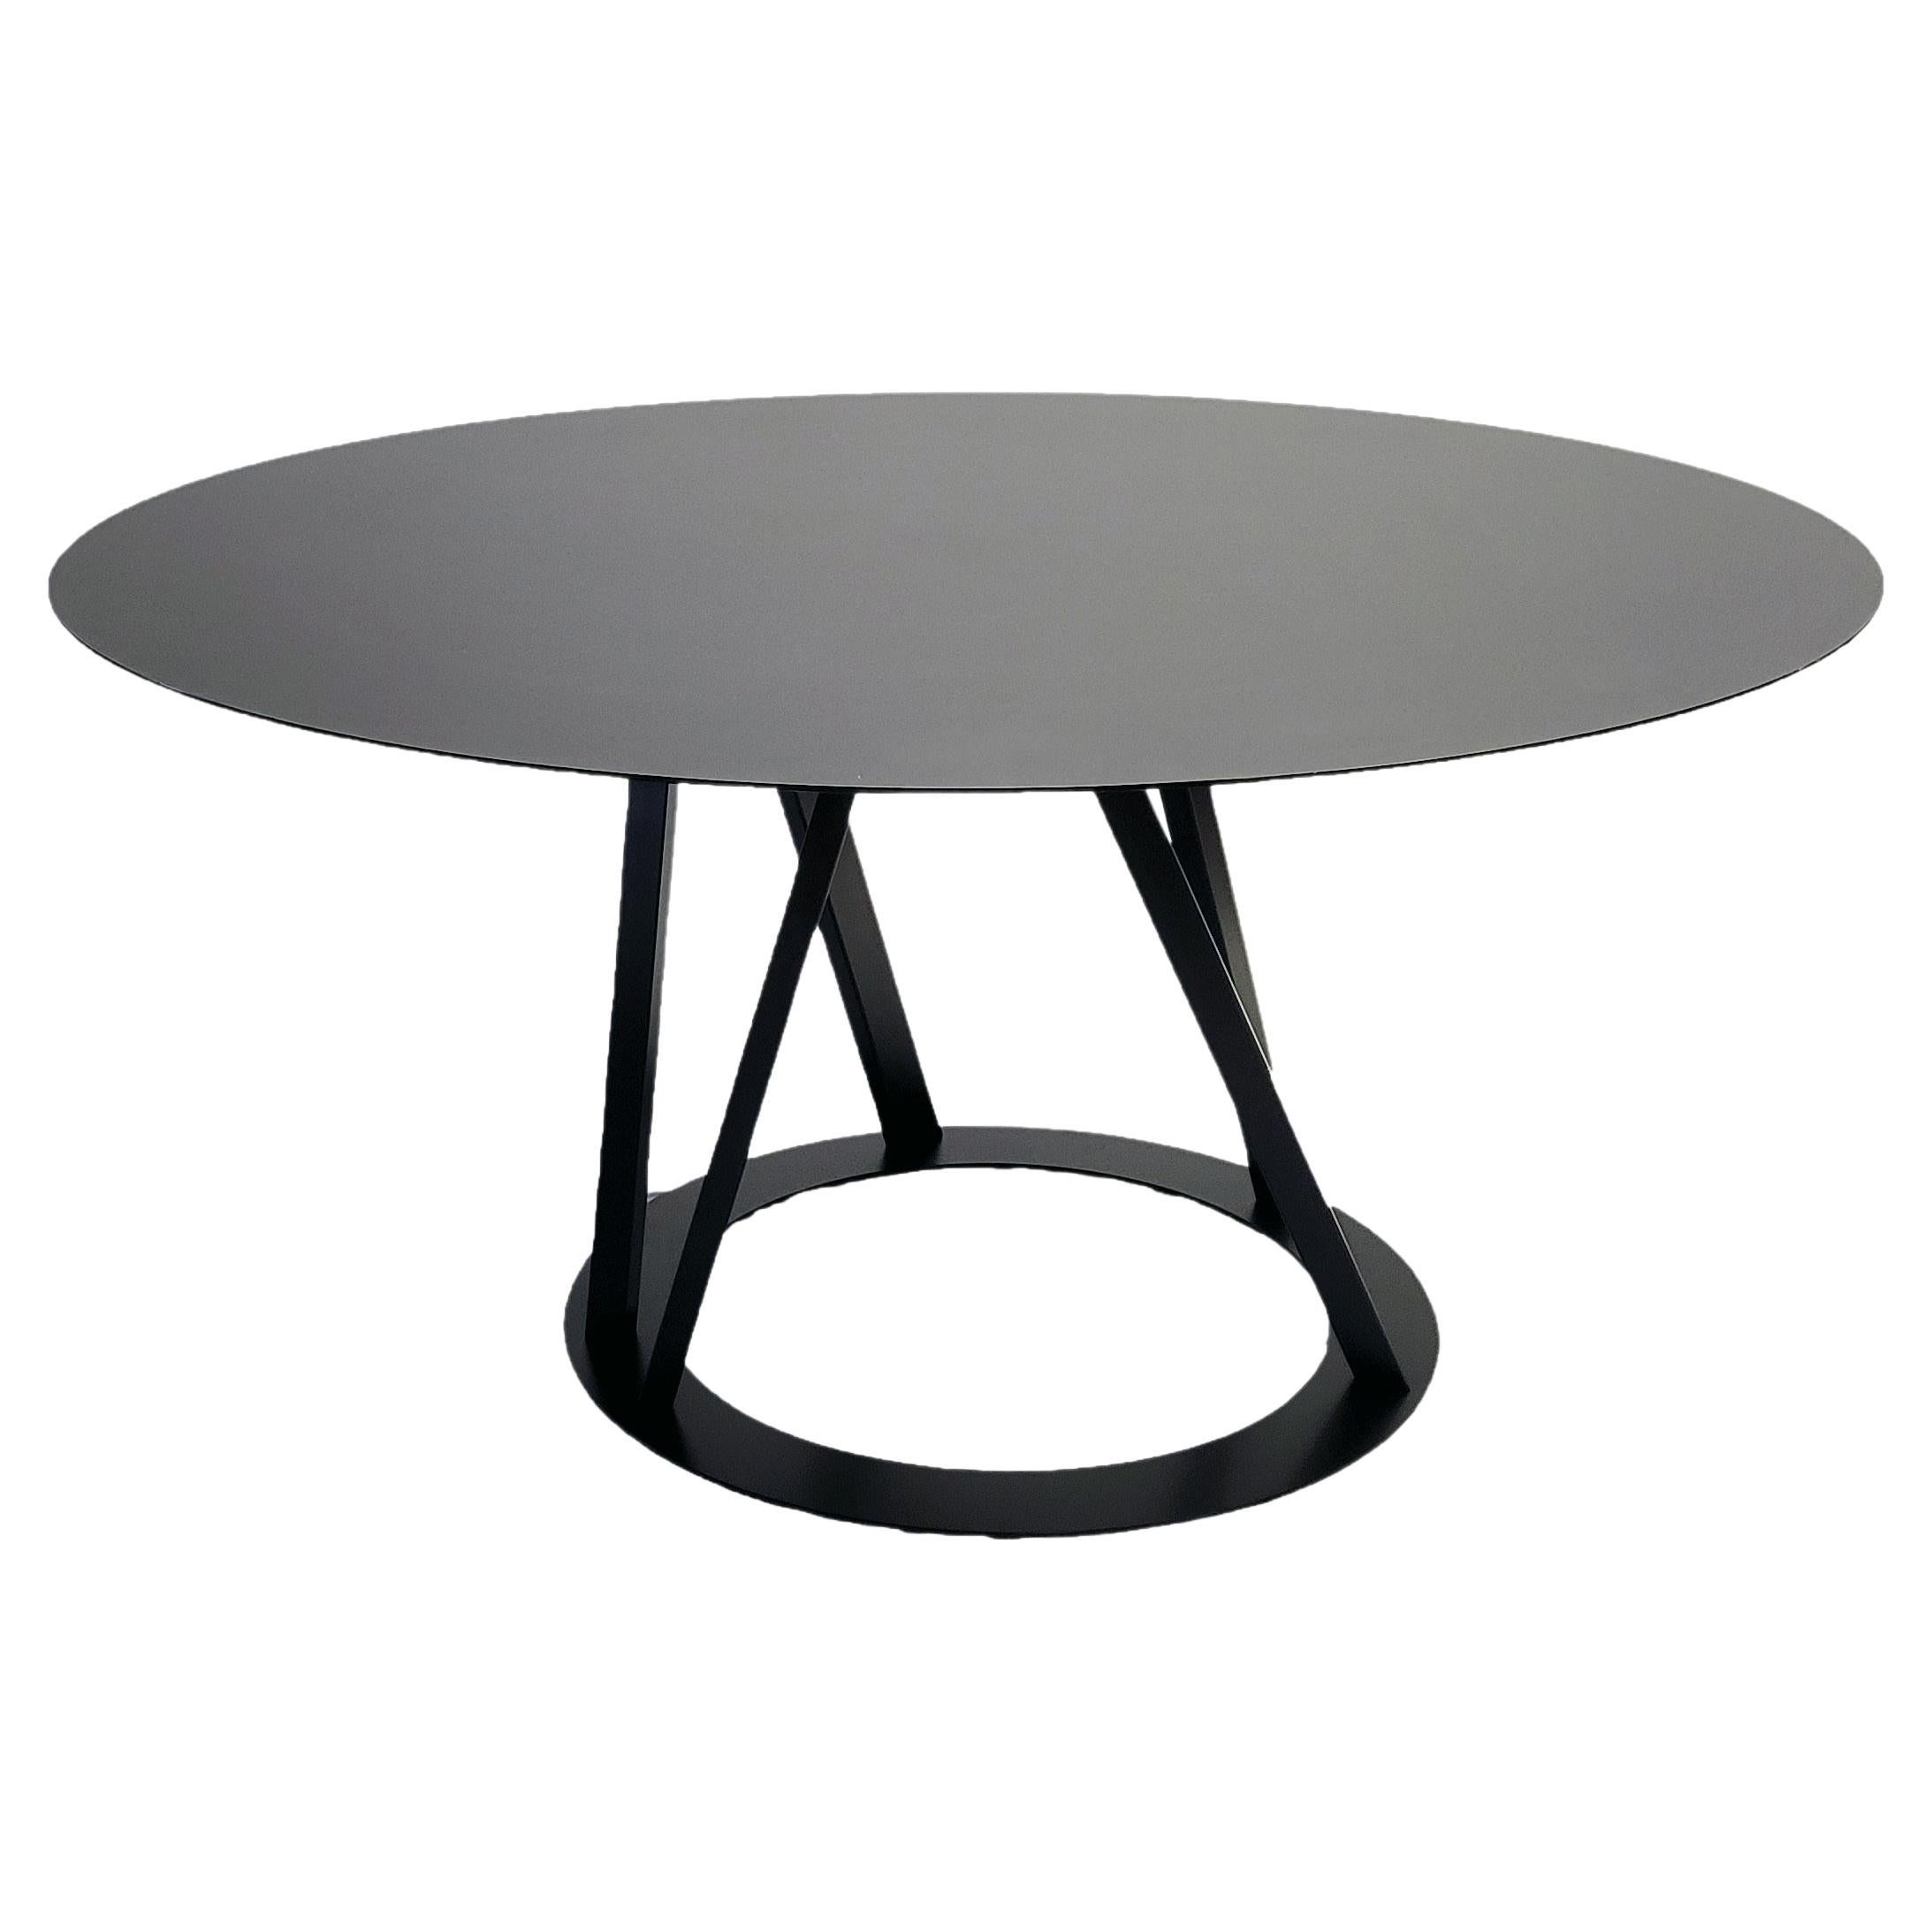 Round Big Irony Dining Table by Maurizio Peregalli for Zeus